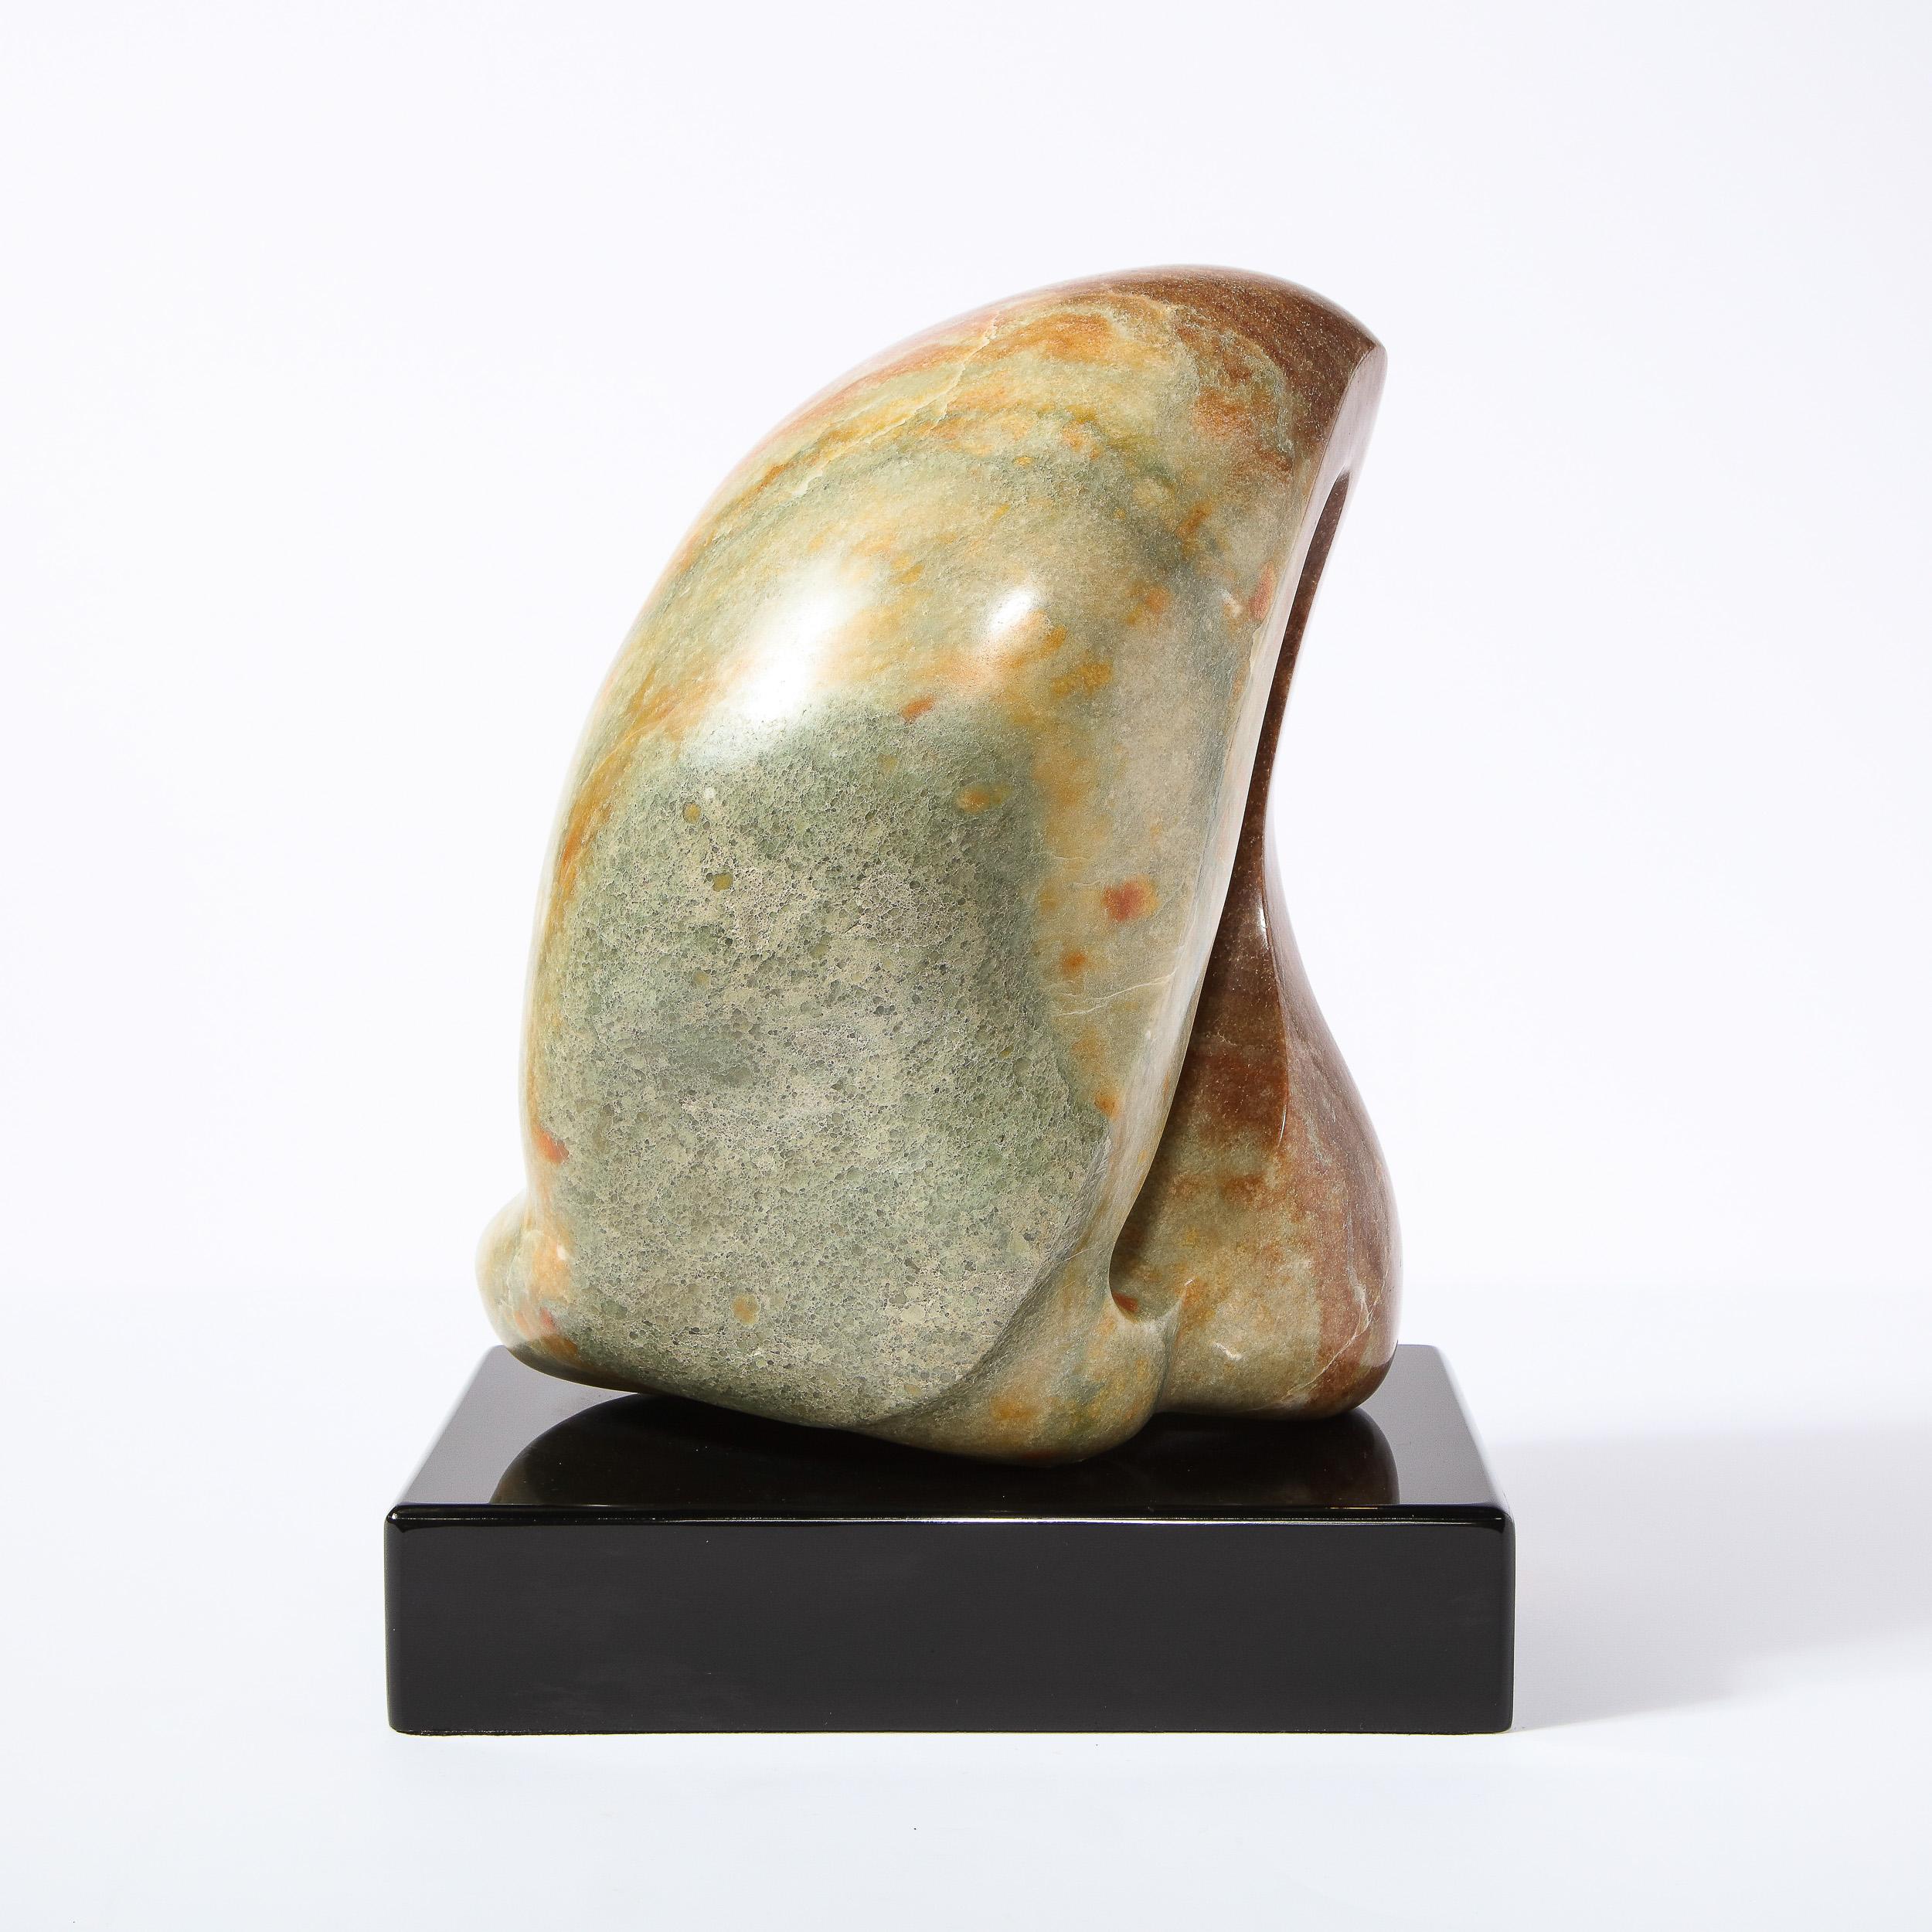 This sophisticated exotic green marble modernist sculpture, entitled 